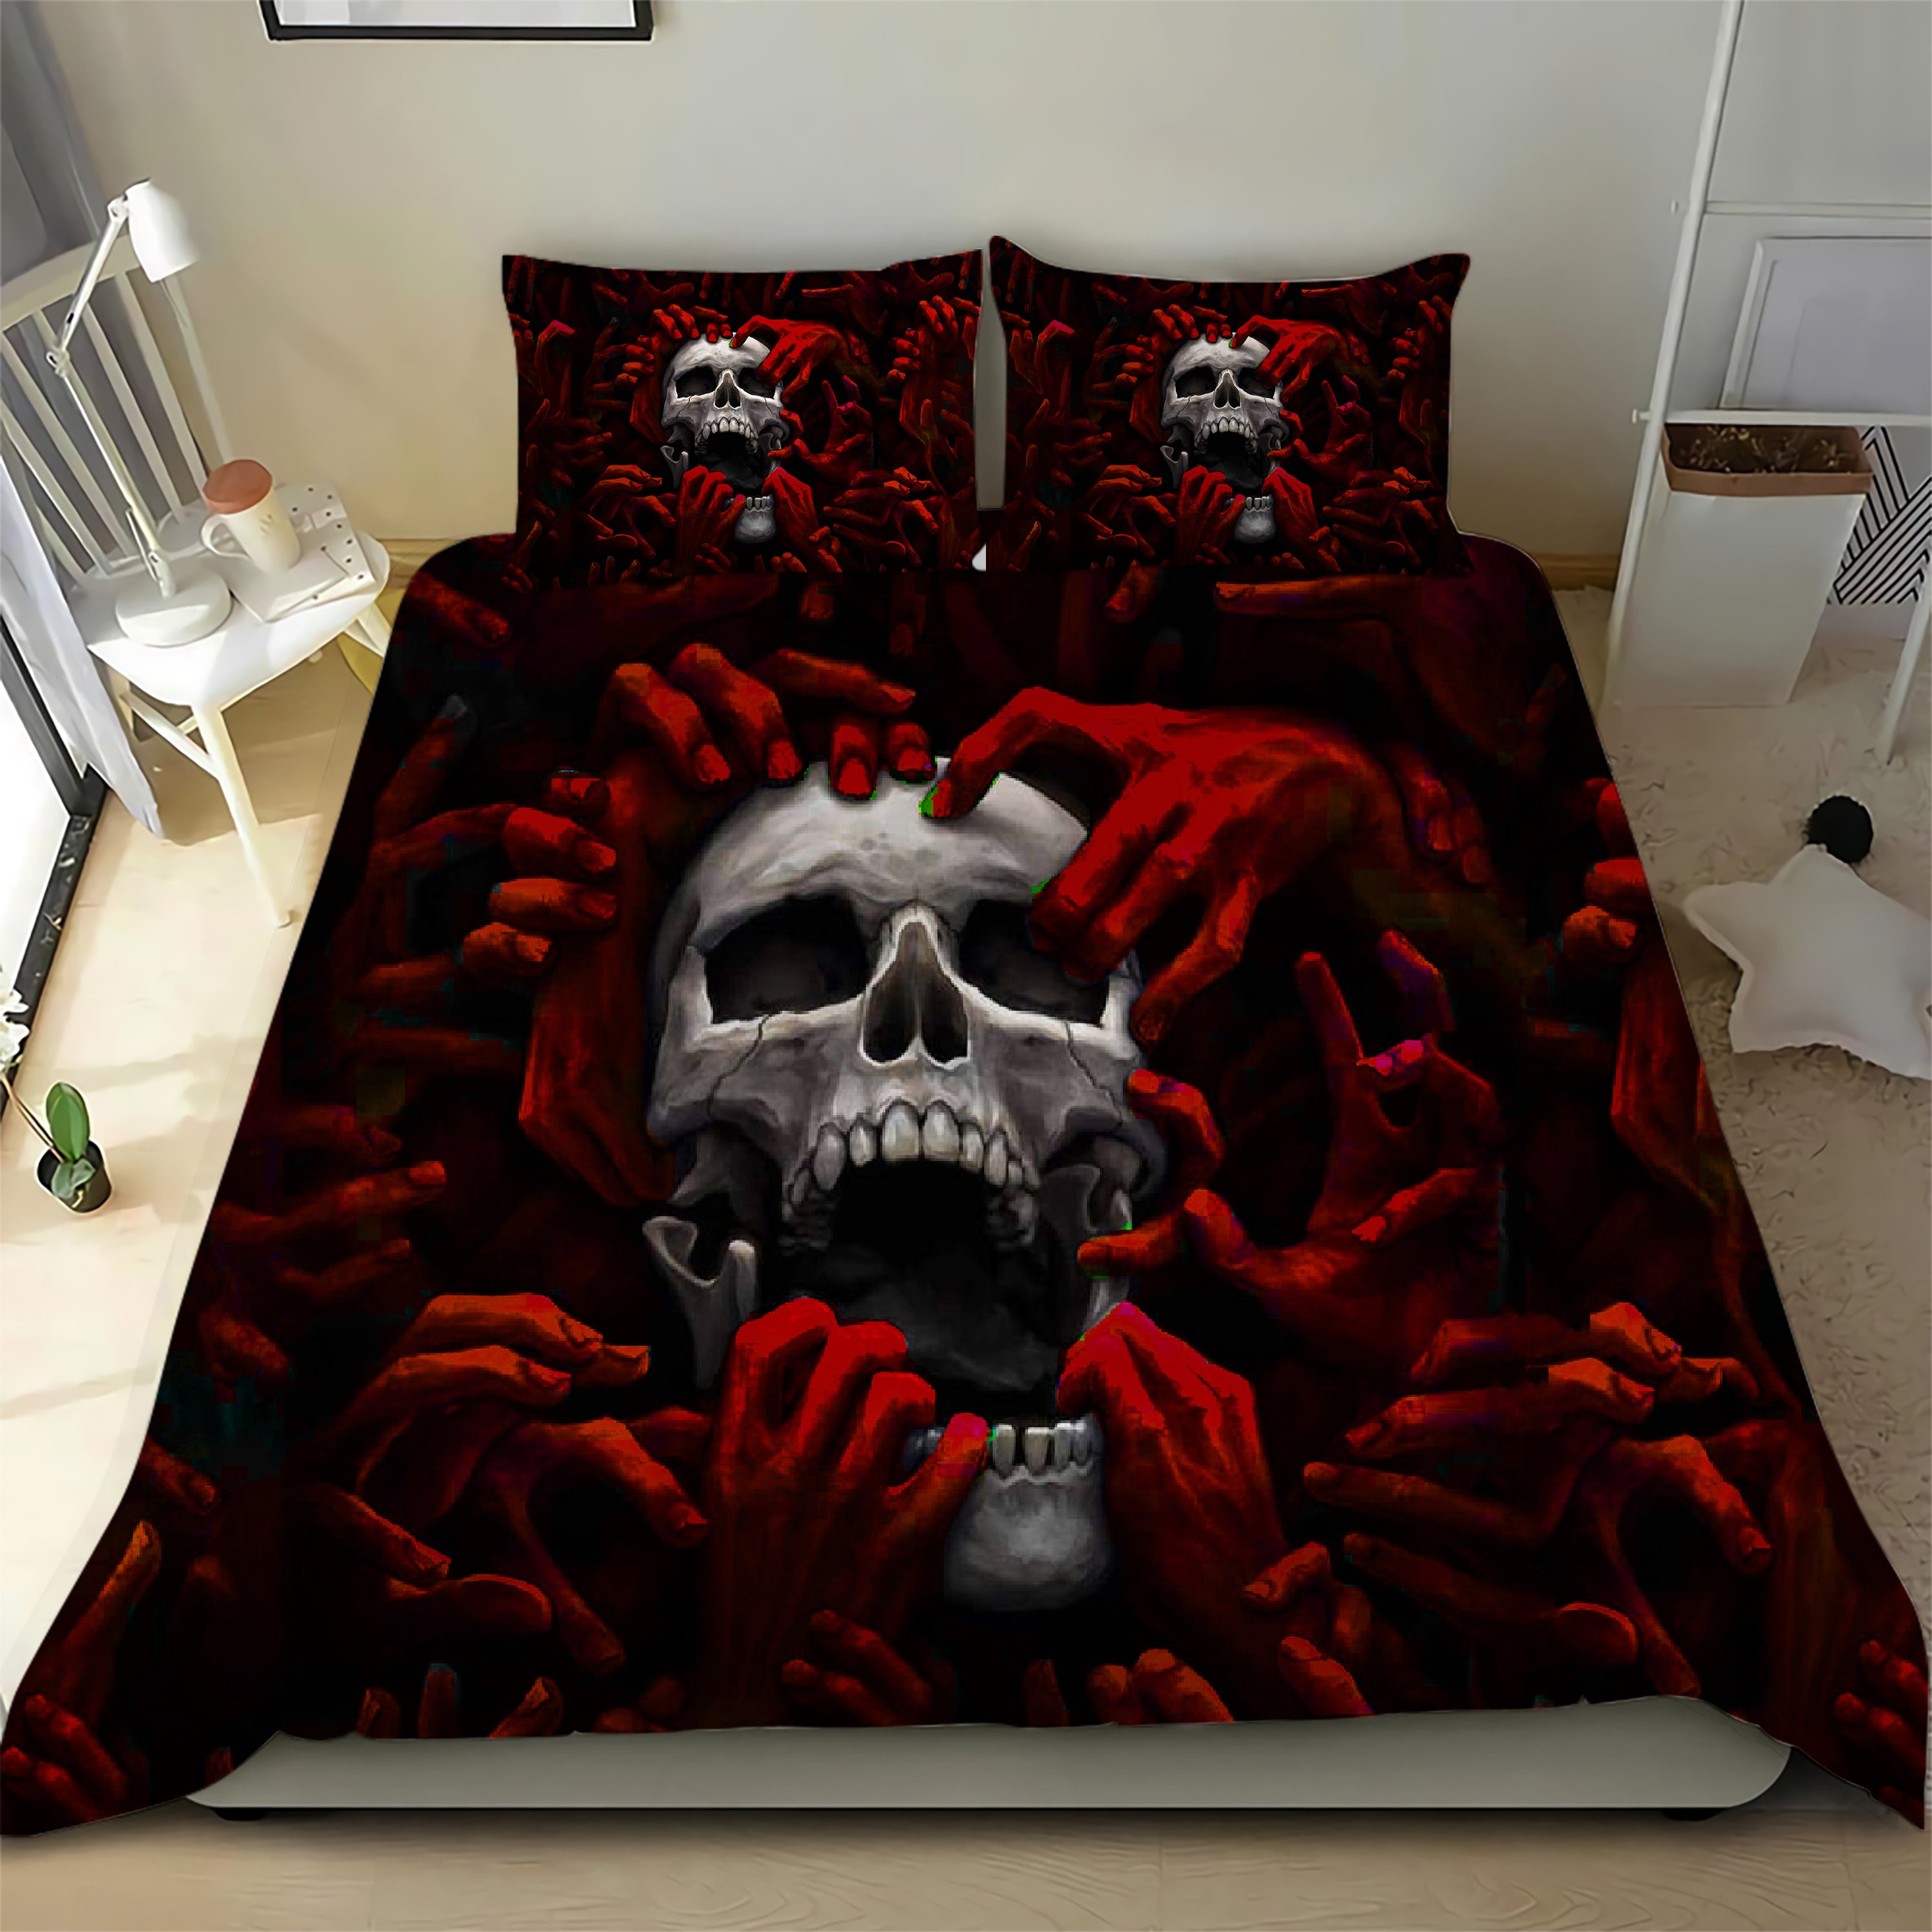 Skull Red Hands From Hell Bedding Set 08632